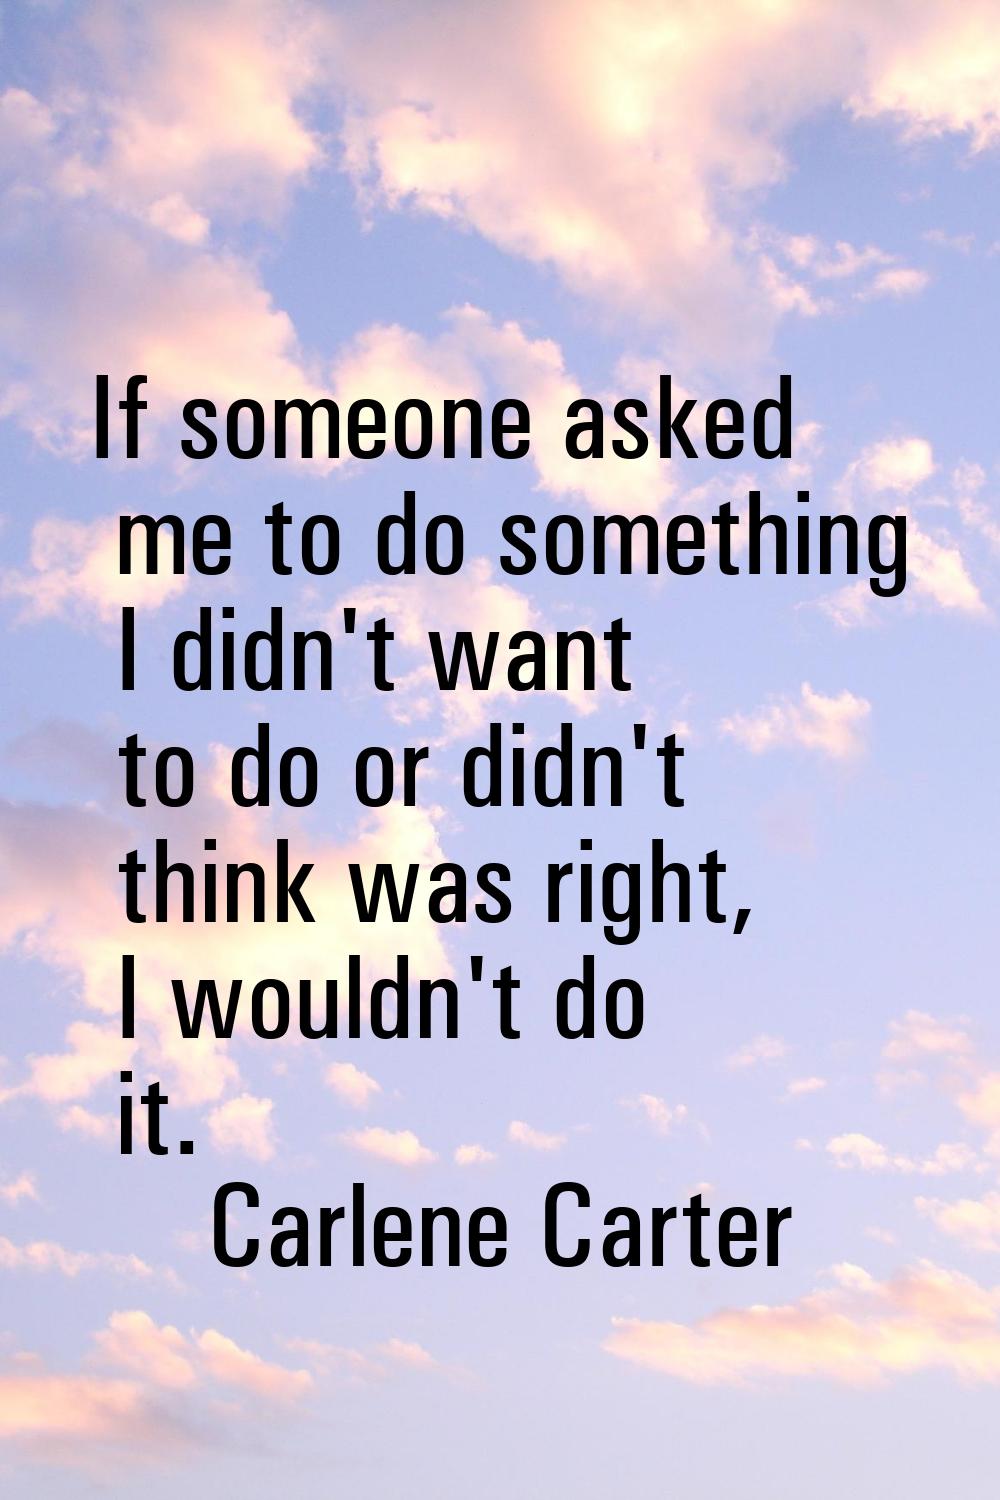 If someone asked me to do something I didn't want to do or didn't think was right, I wouldn't do it